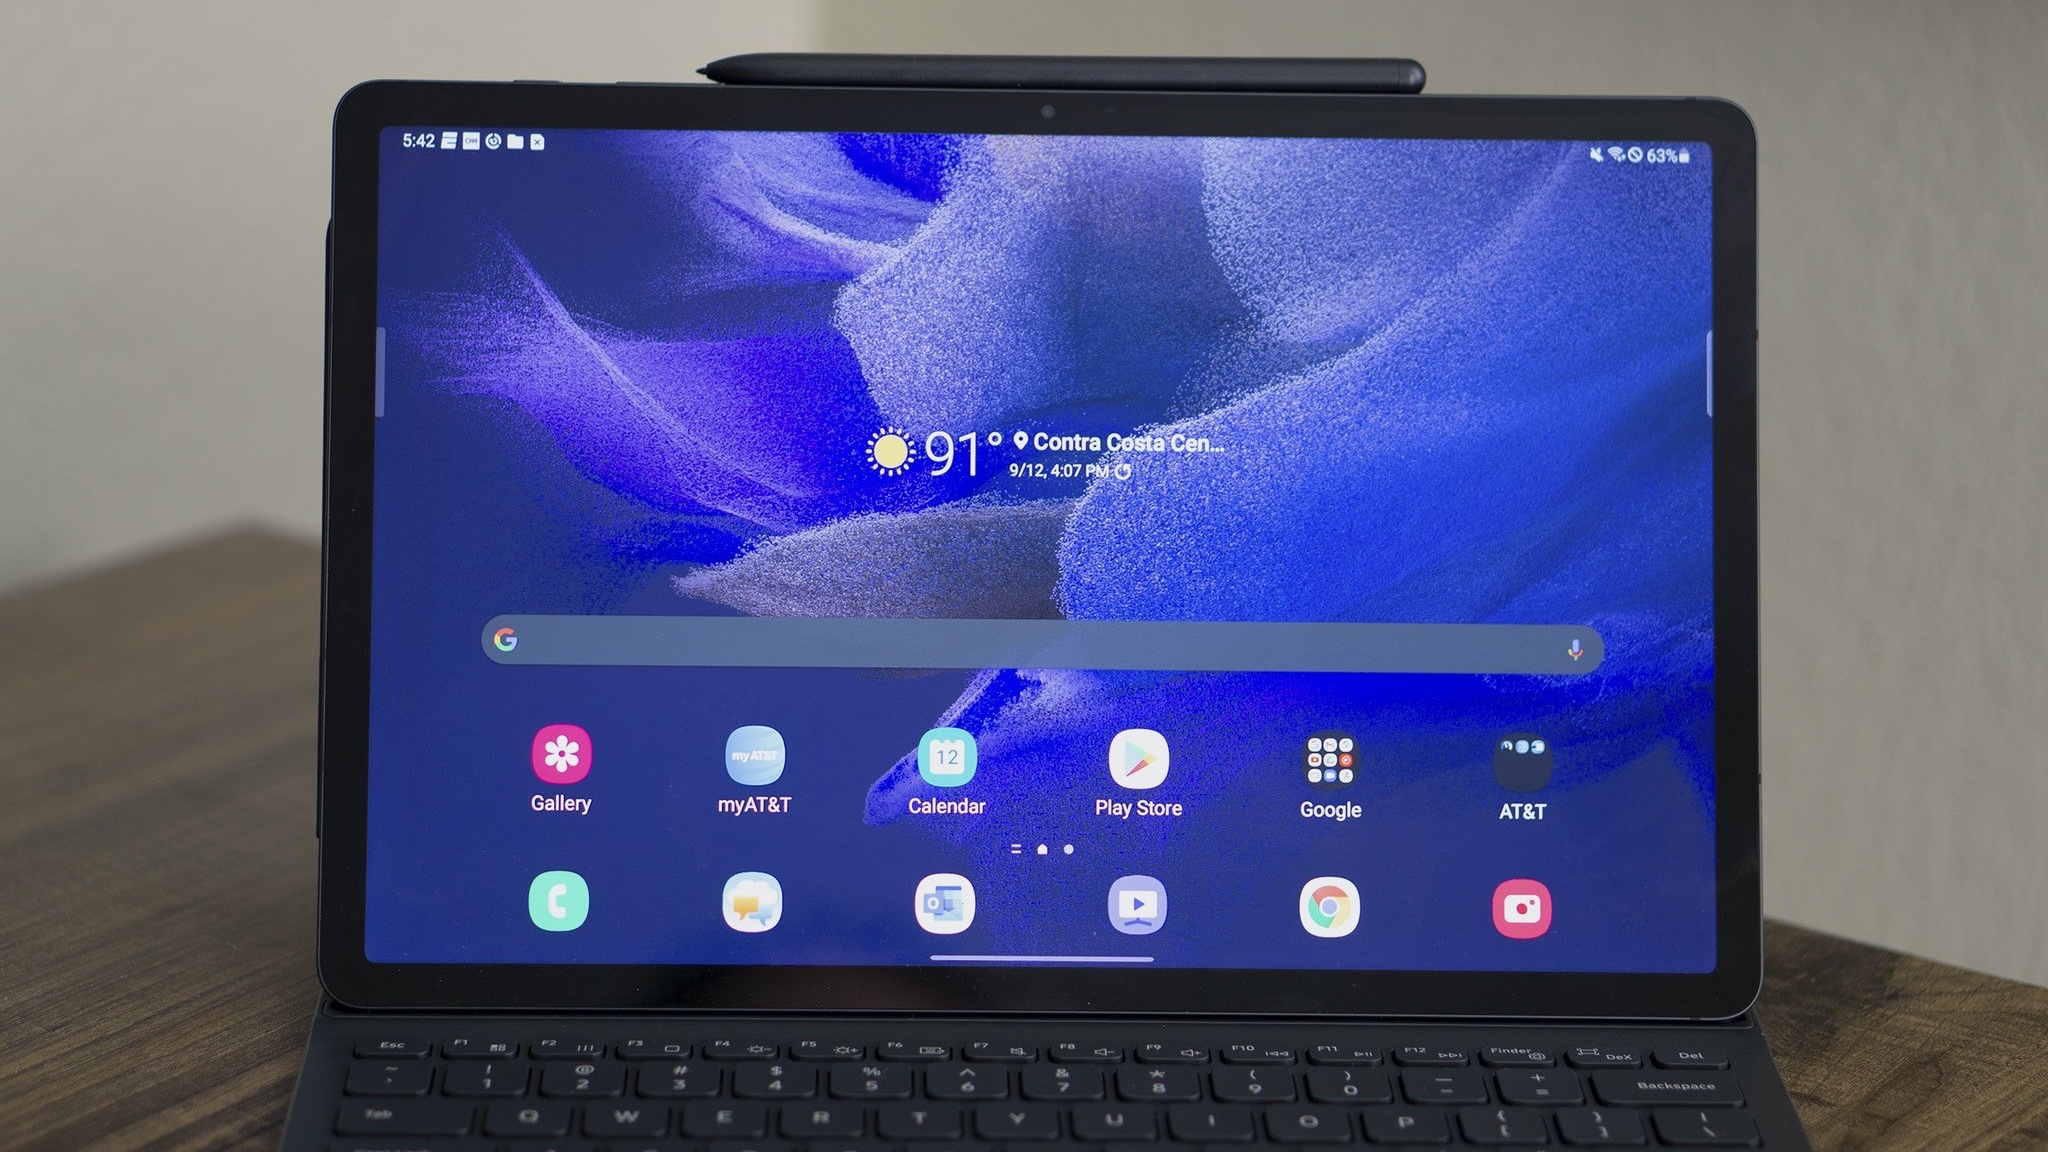 Samsung Galaxy Tab S7 FE home screen with keyboard and S Pen attached